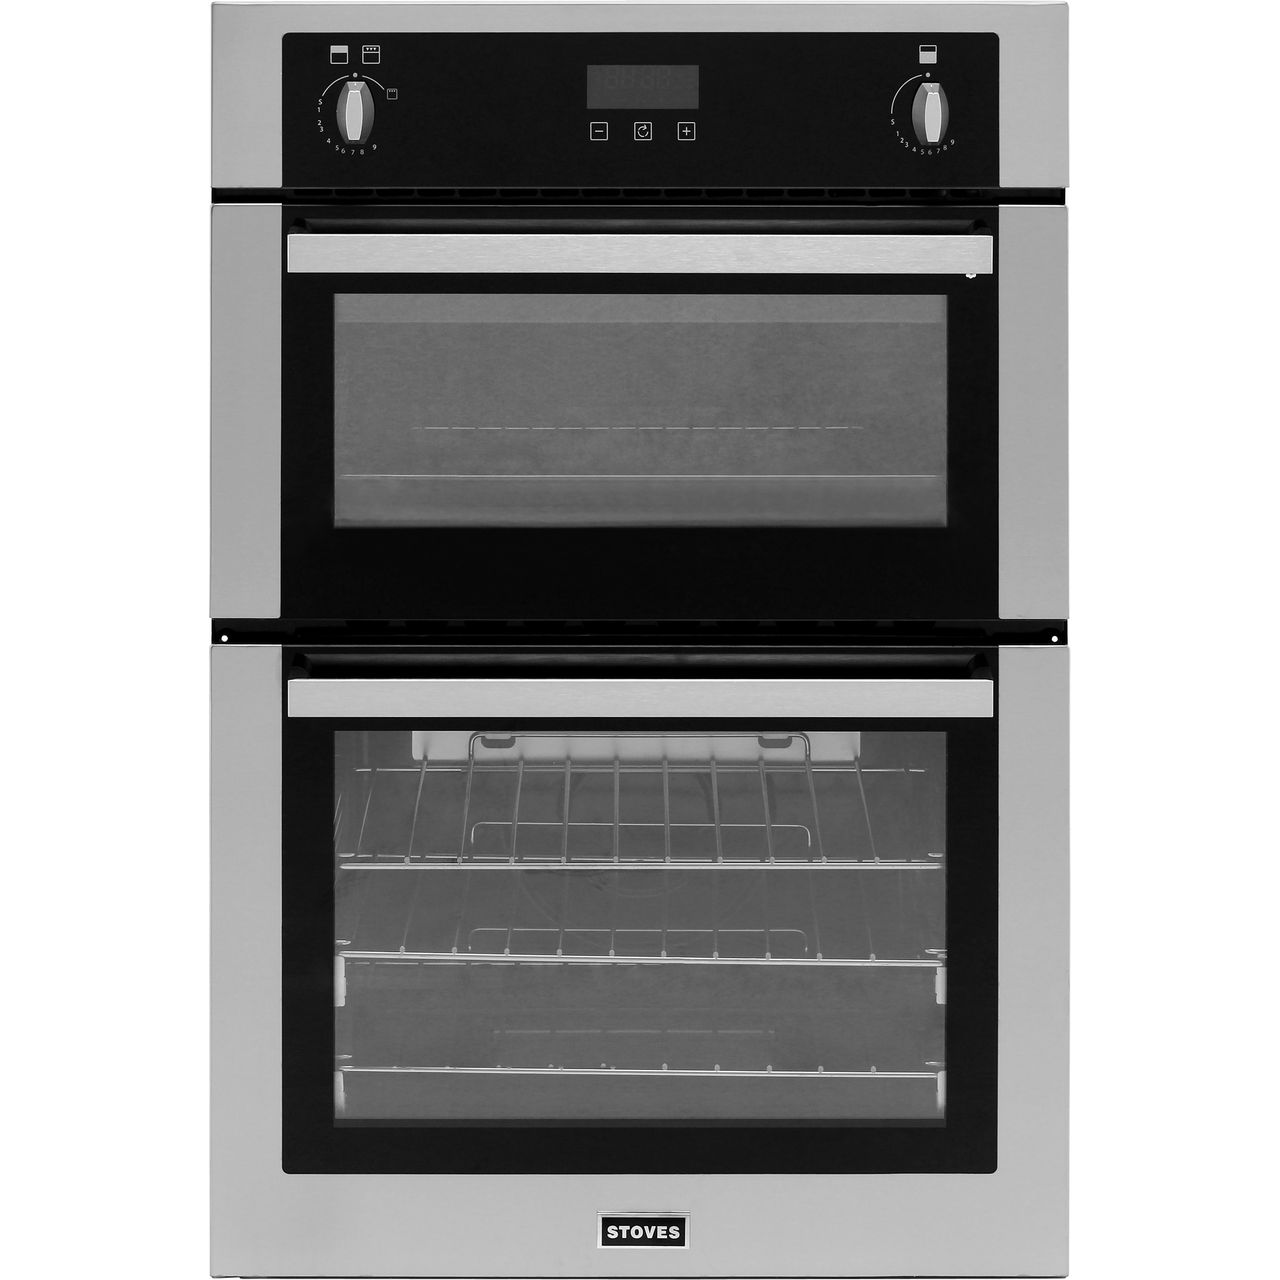 Stoves BI900G Built In Double Oven with Full Width Electric Grill Review